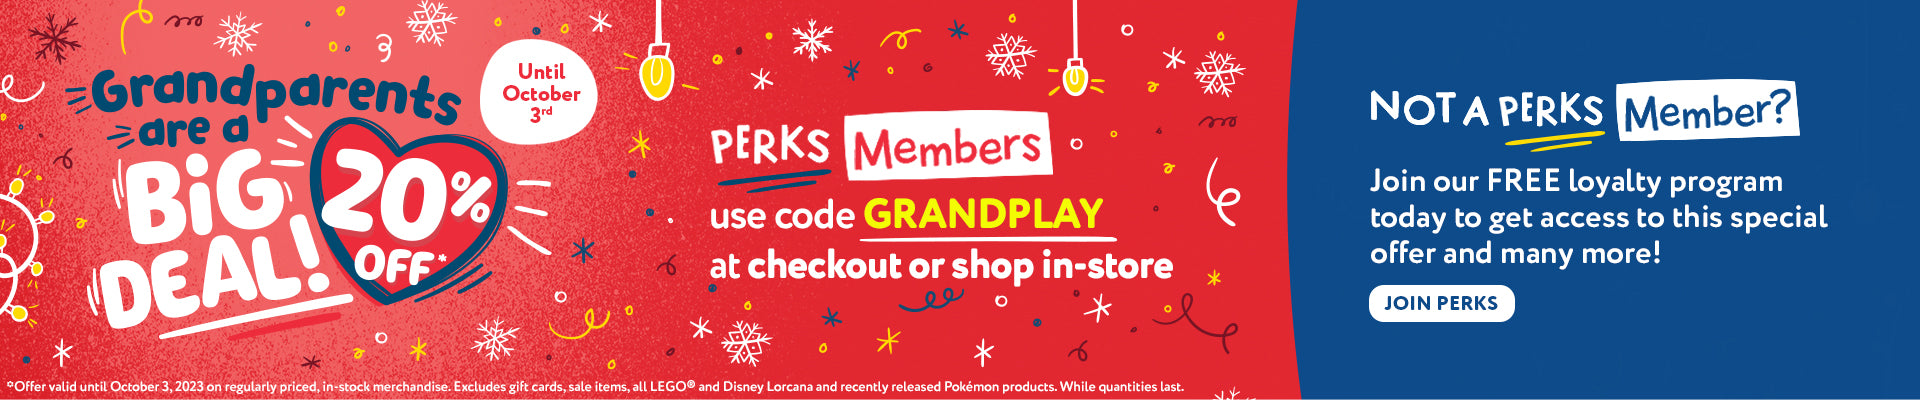 Perks Exclusive.  Until October 3, Grandparents save 20% off regularly priced items.  PERKS Members use code GRANDPLAY Online or shop in-store! Not a PERKS Member?  Join our FREE loyalty program today to get access to this special offer and many more!  ‌  Click to Join.